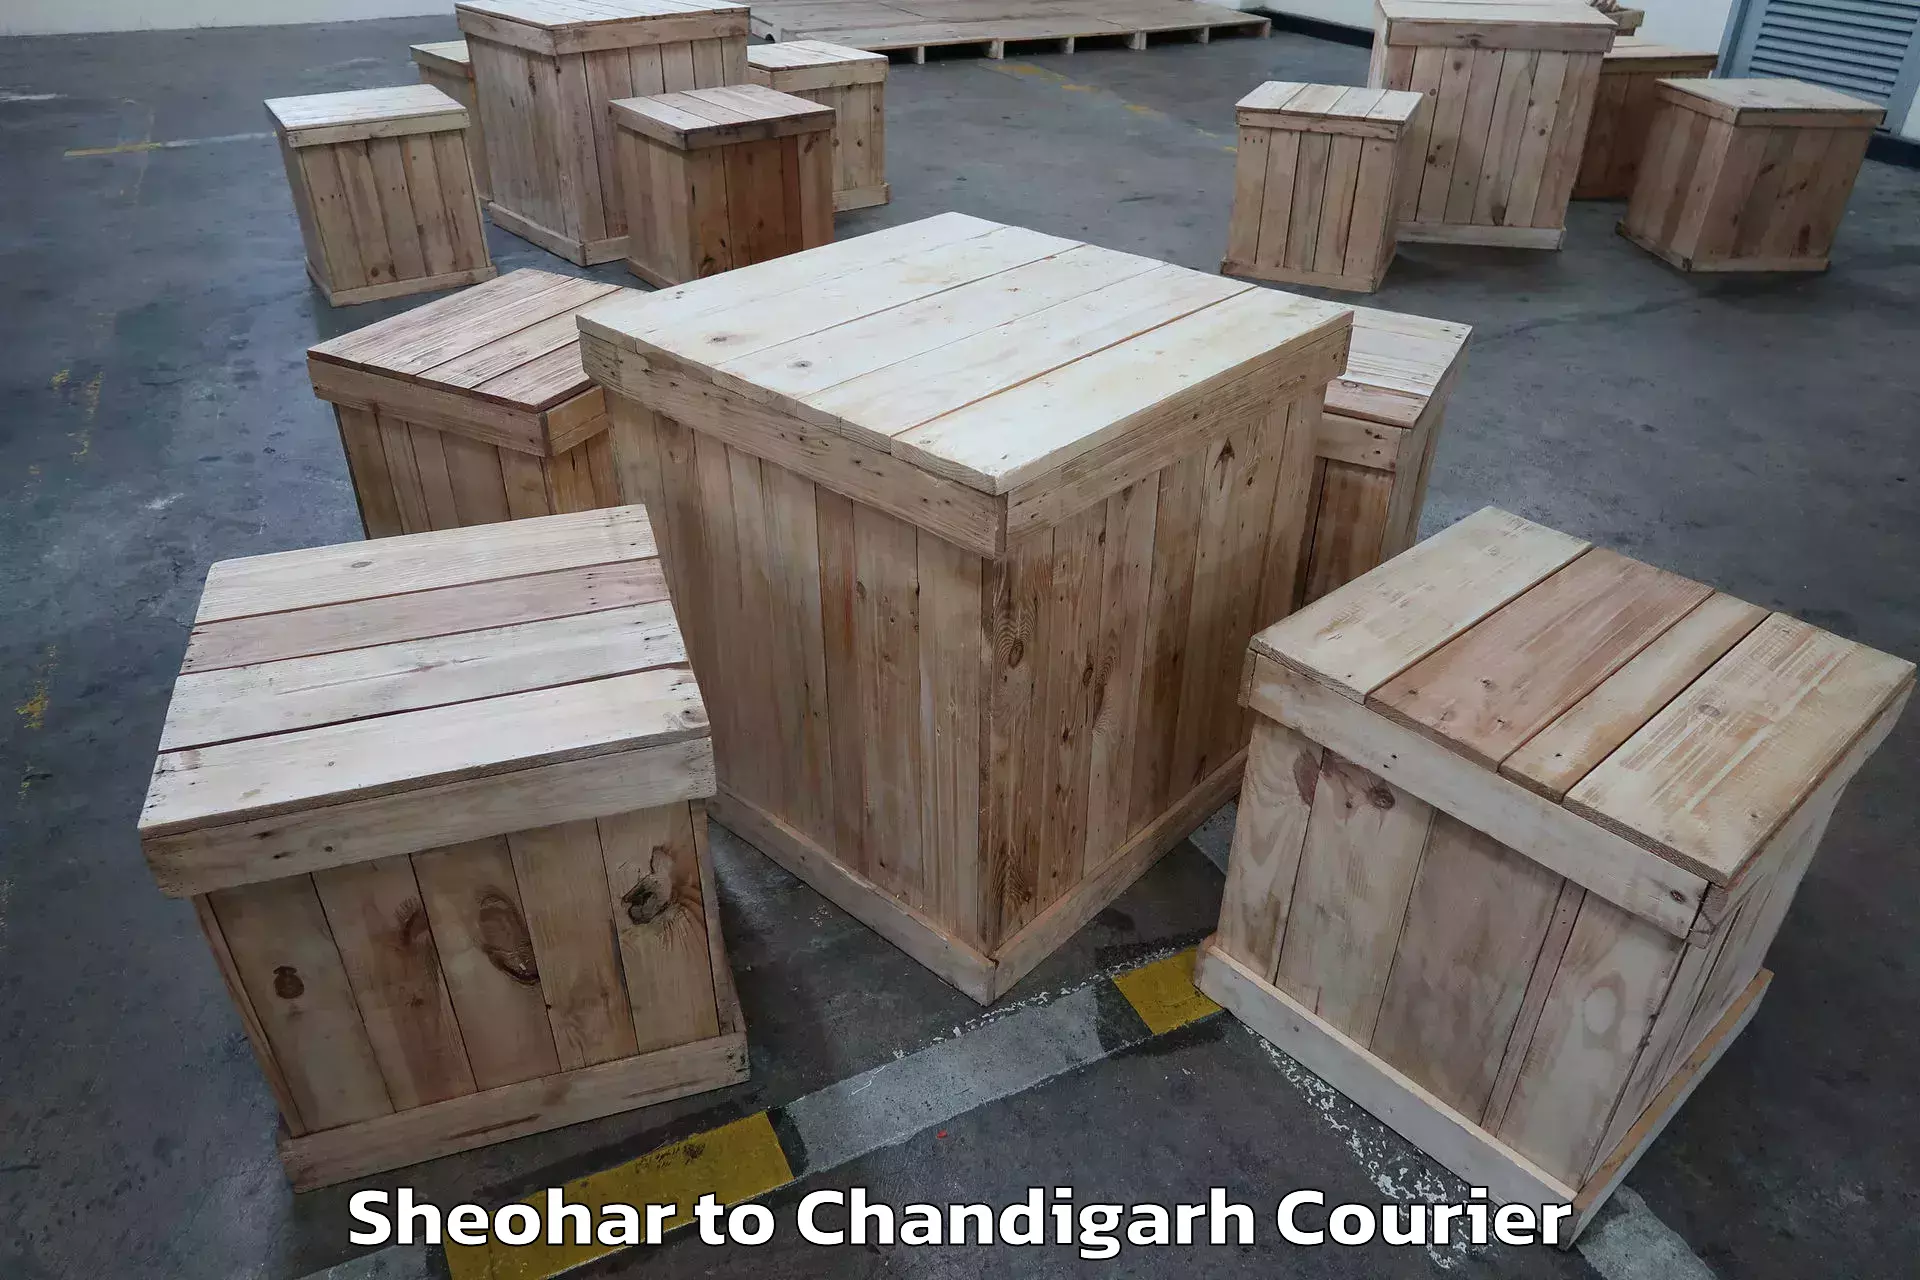 Trusted moving company Sheohar to Chandigarh